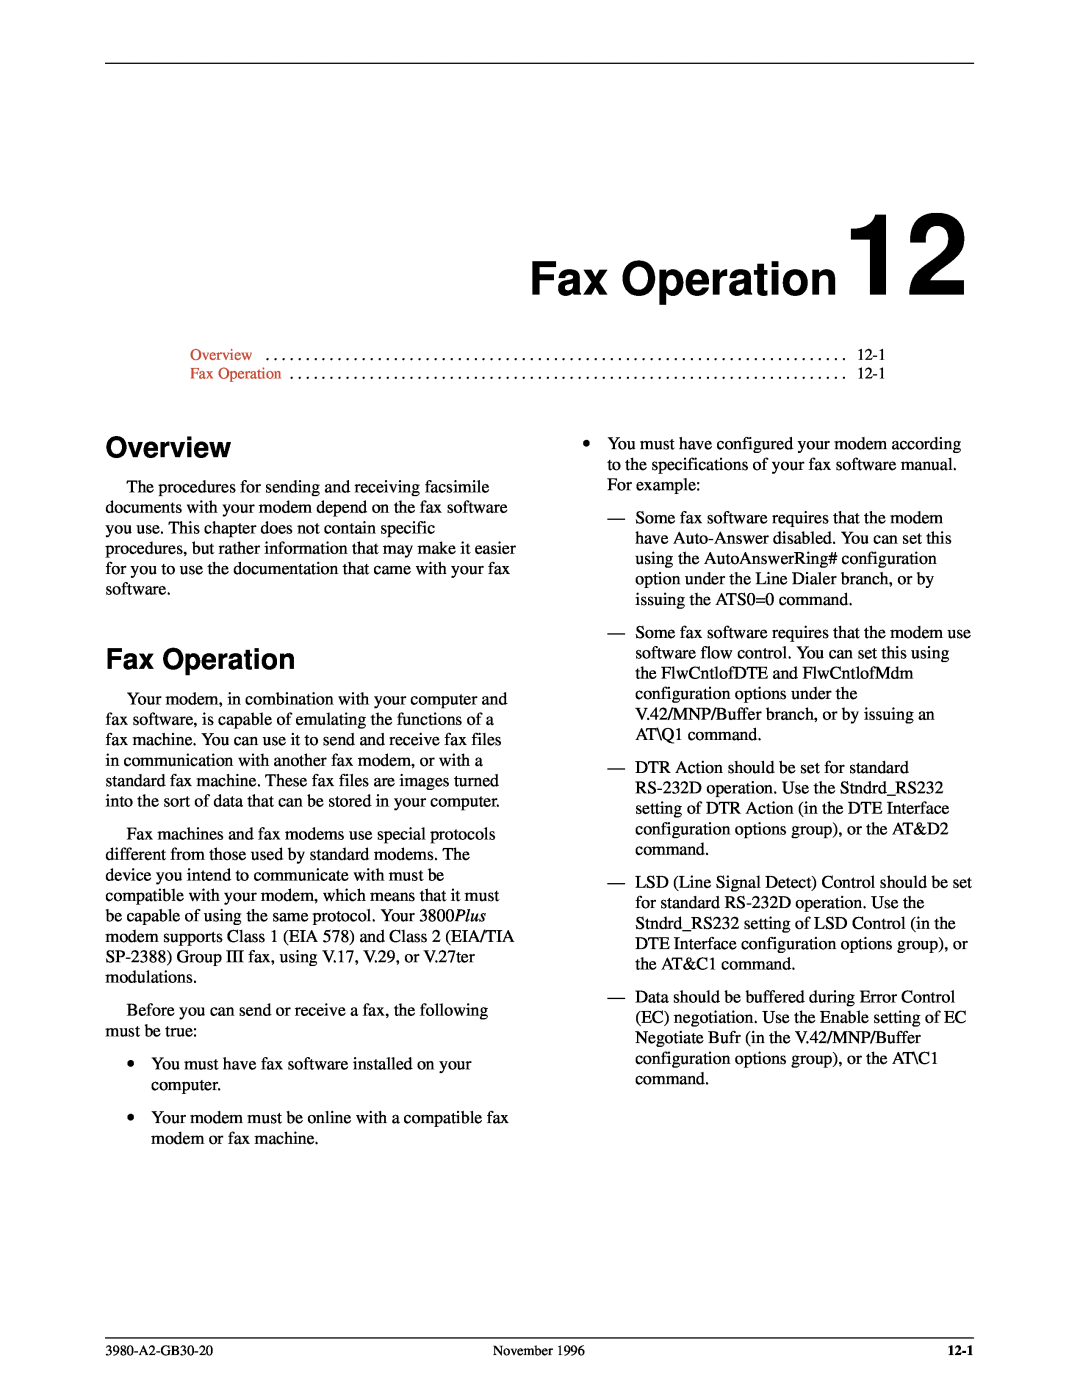 Paradyne 3800PLUS manual Fax Operation, Overview 